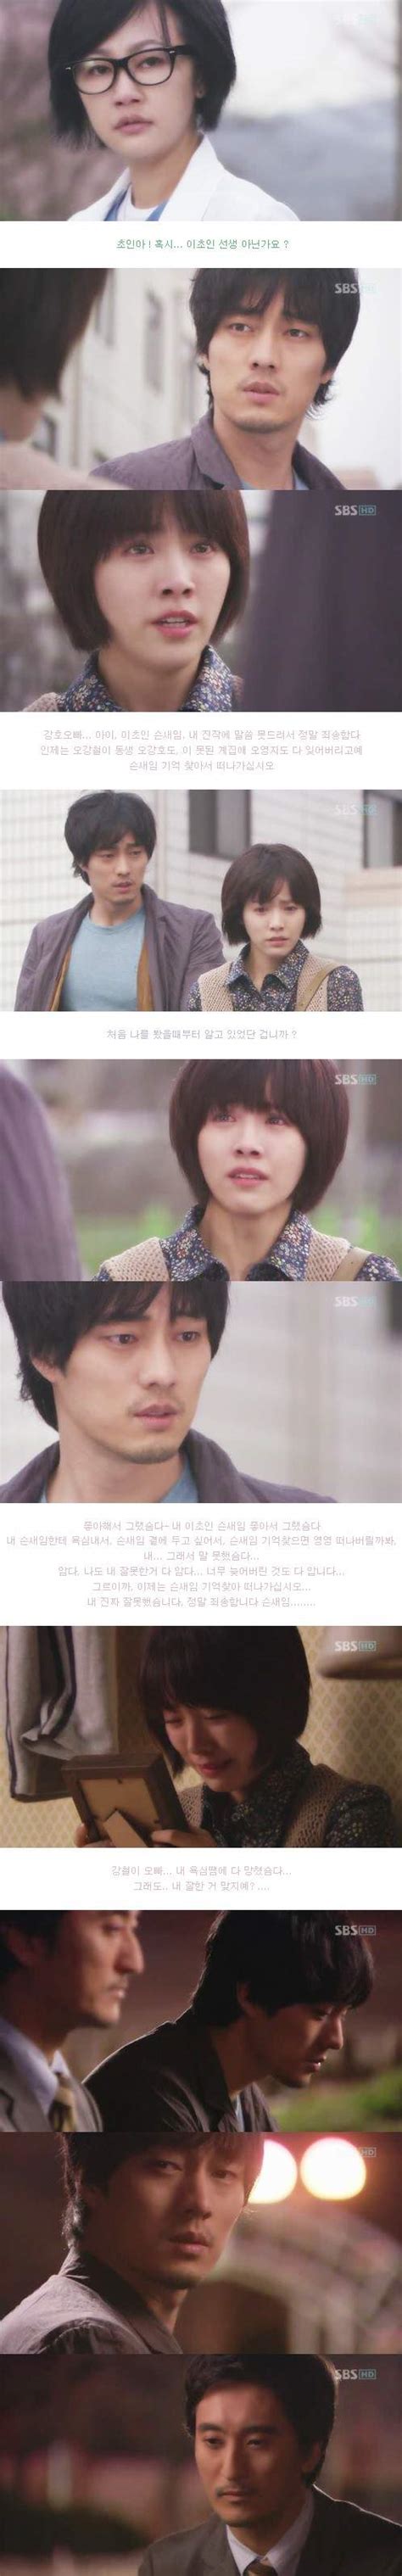 Cain And Abel Episode 11 Screen Captures Drama 2008 카인과 아벨